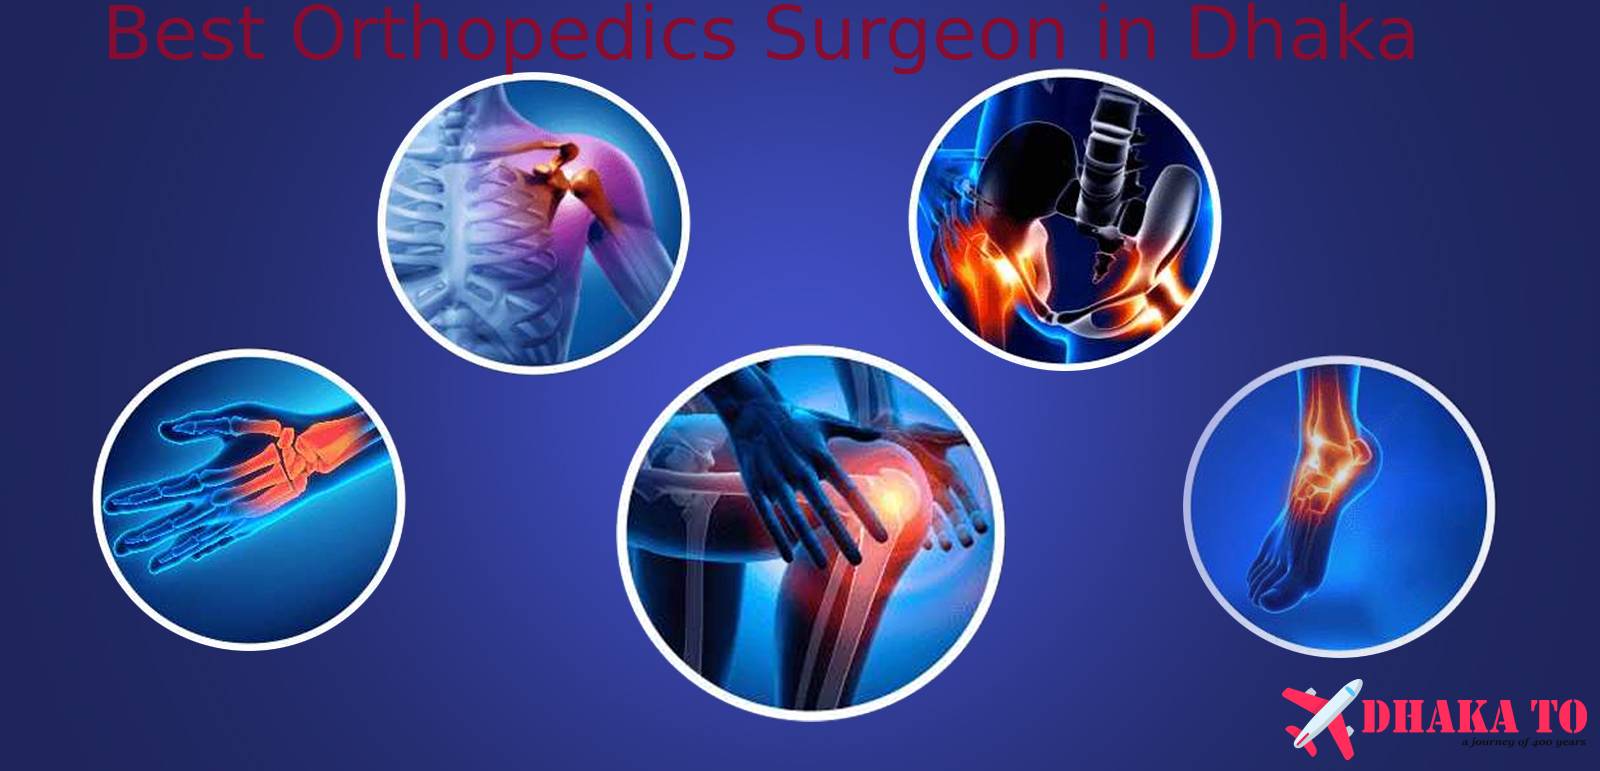 Best Orthopedic Surgeon Doctor List and Chamber Location in Dhaka